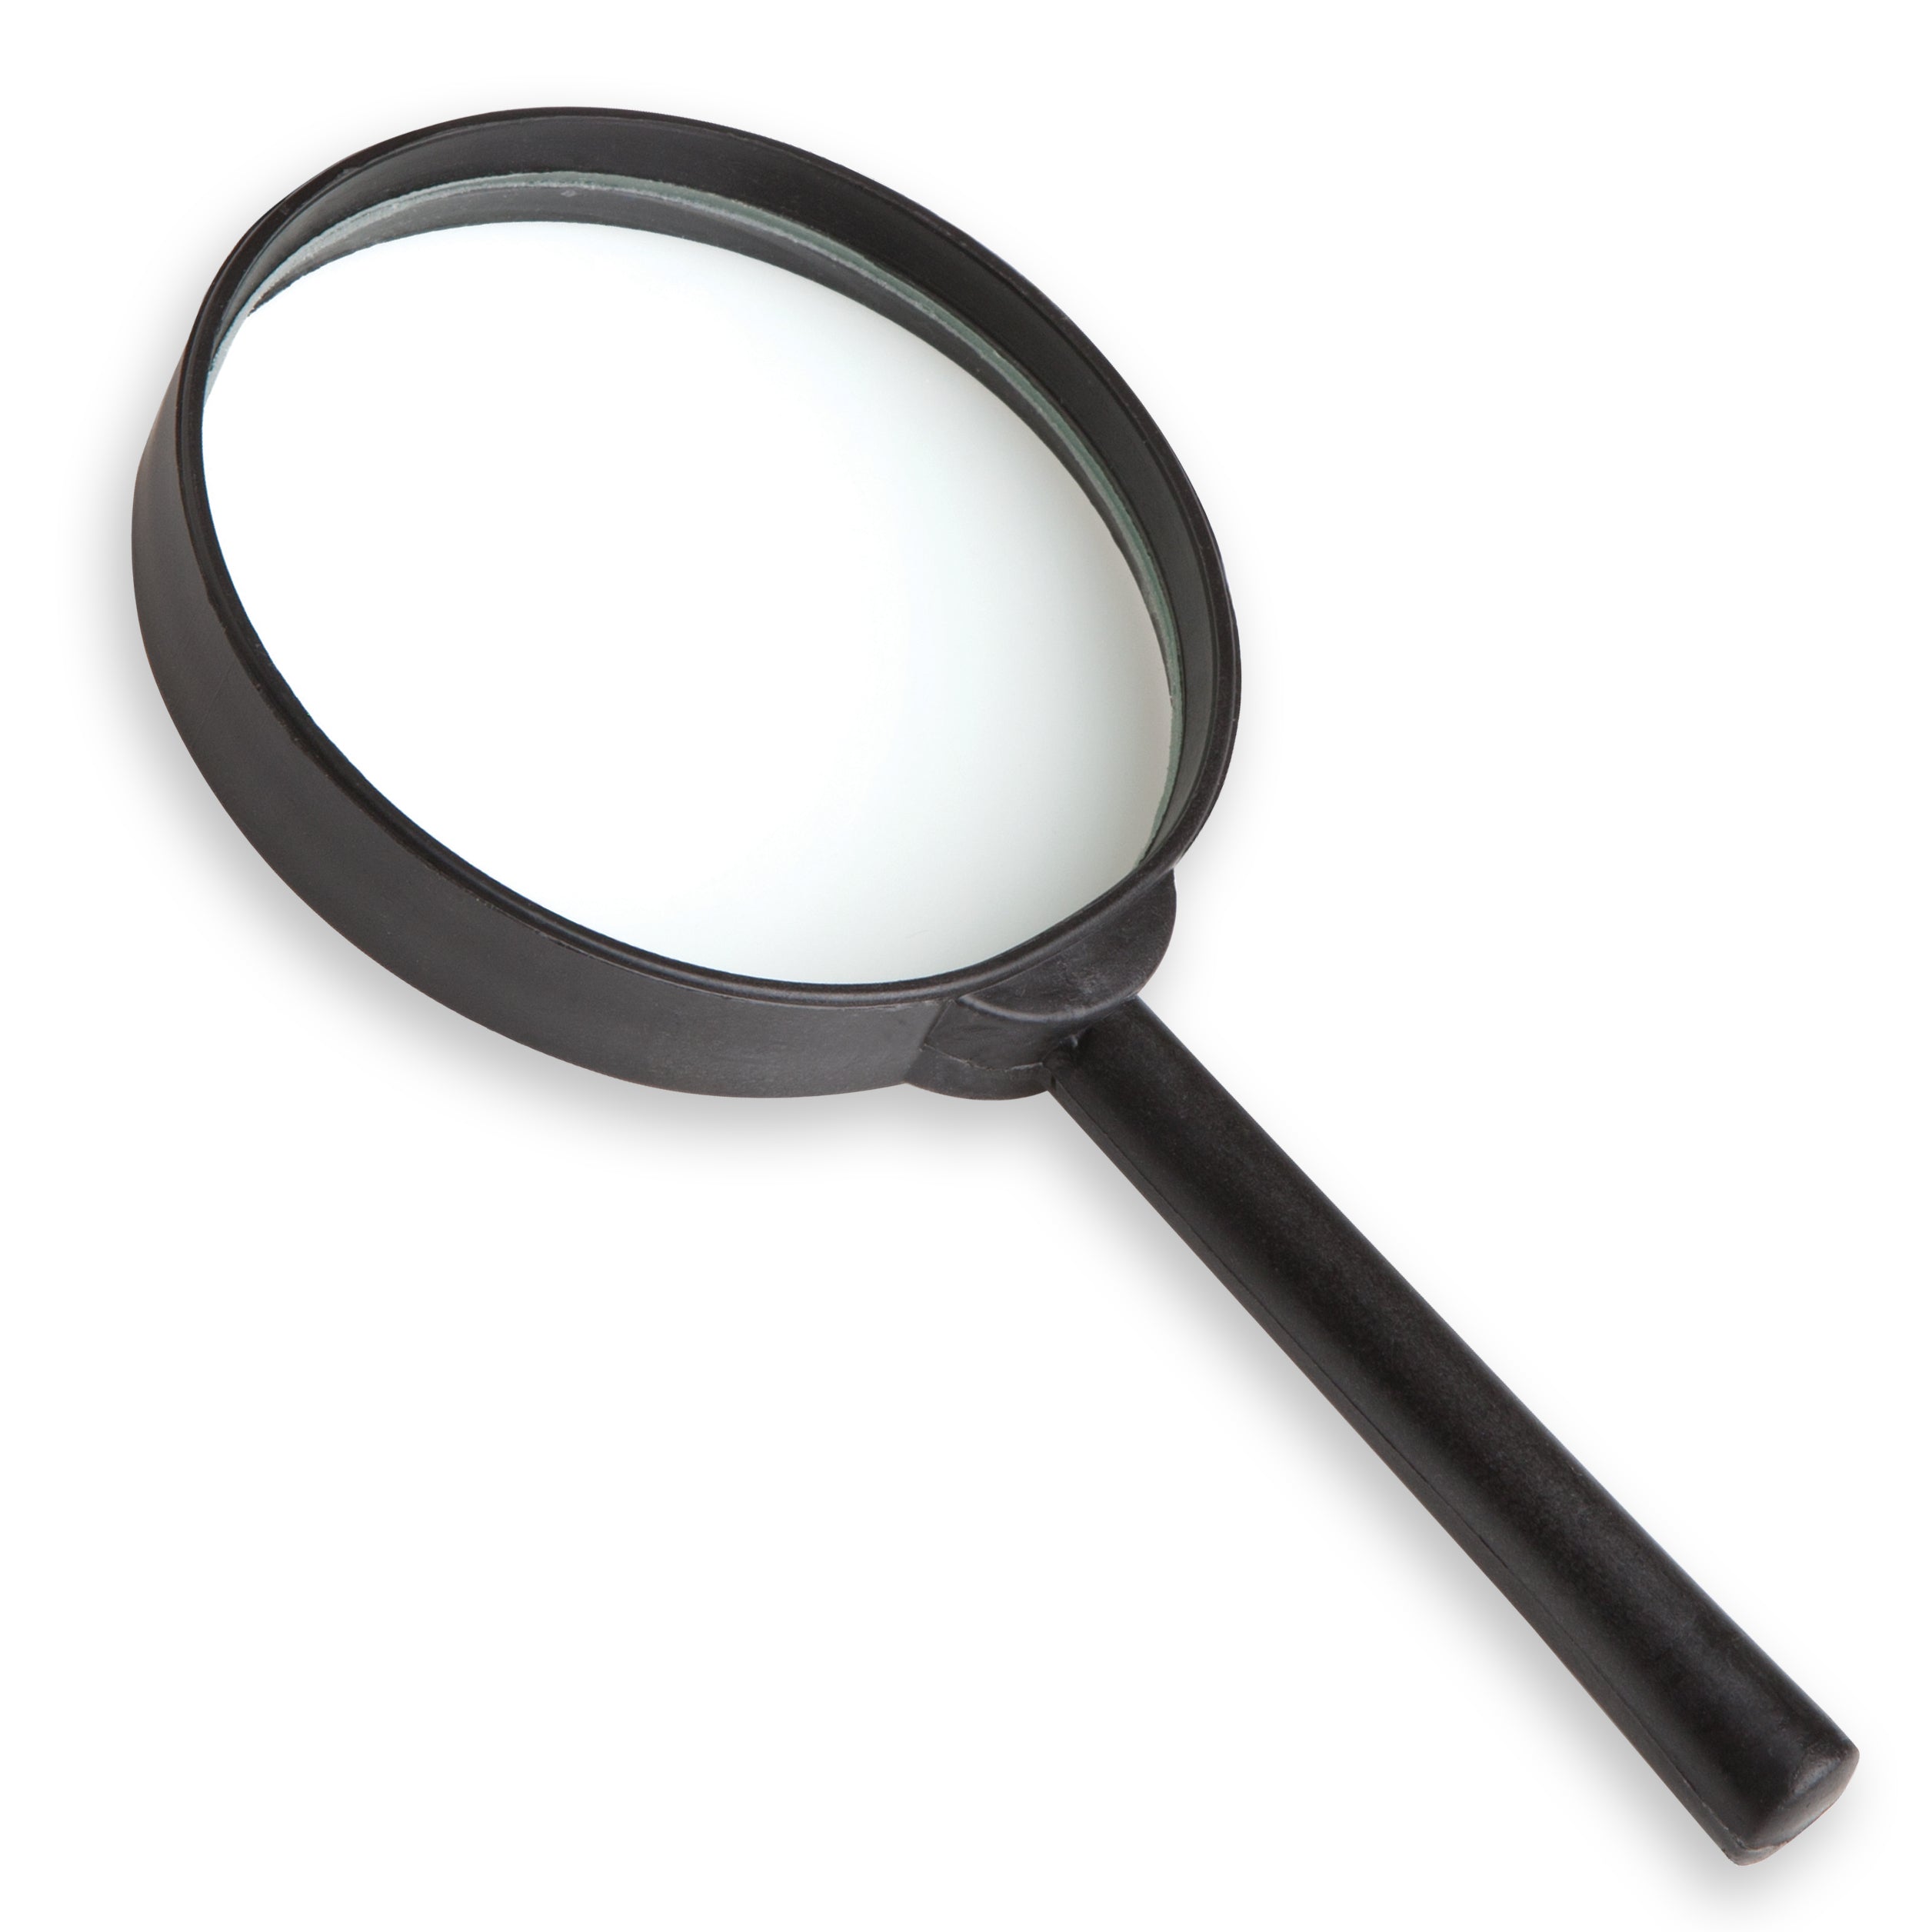 3" Round Magnifier - 4x magnification